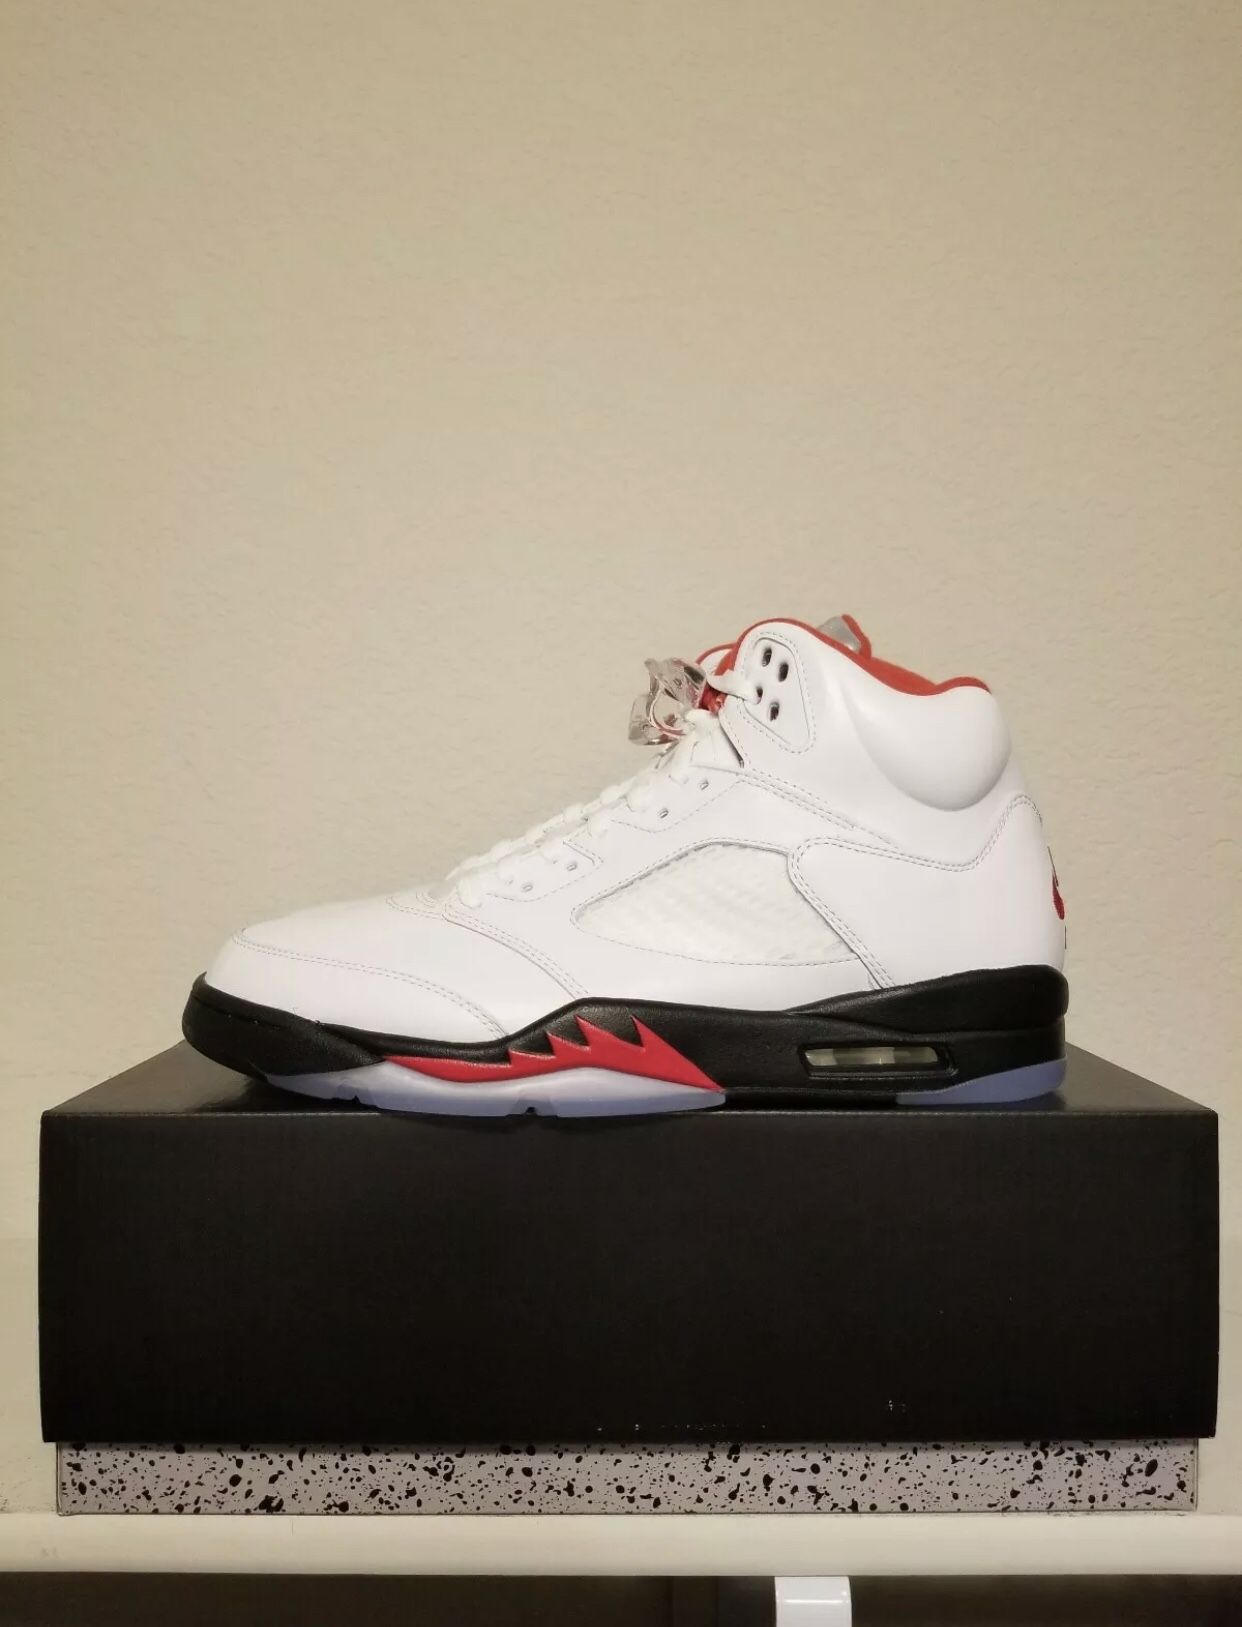 Jordan Fire Red 5 SIZE 11 12 13 14 Available Silver Tongue 2020 *BRAND NEW*